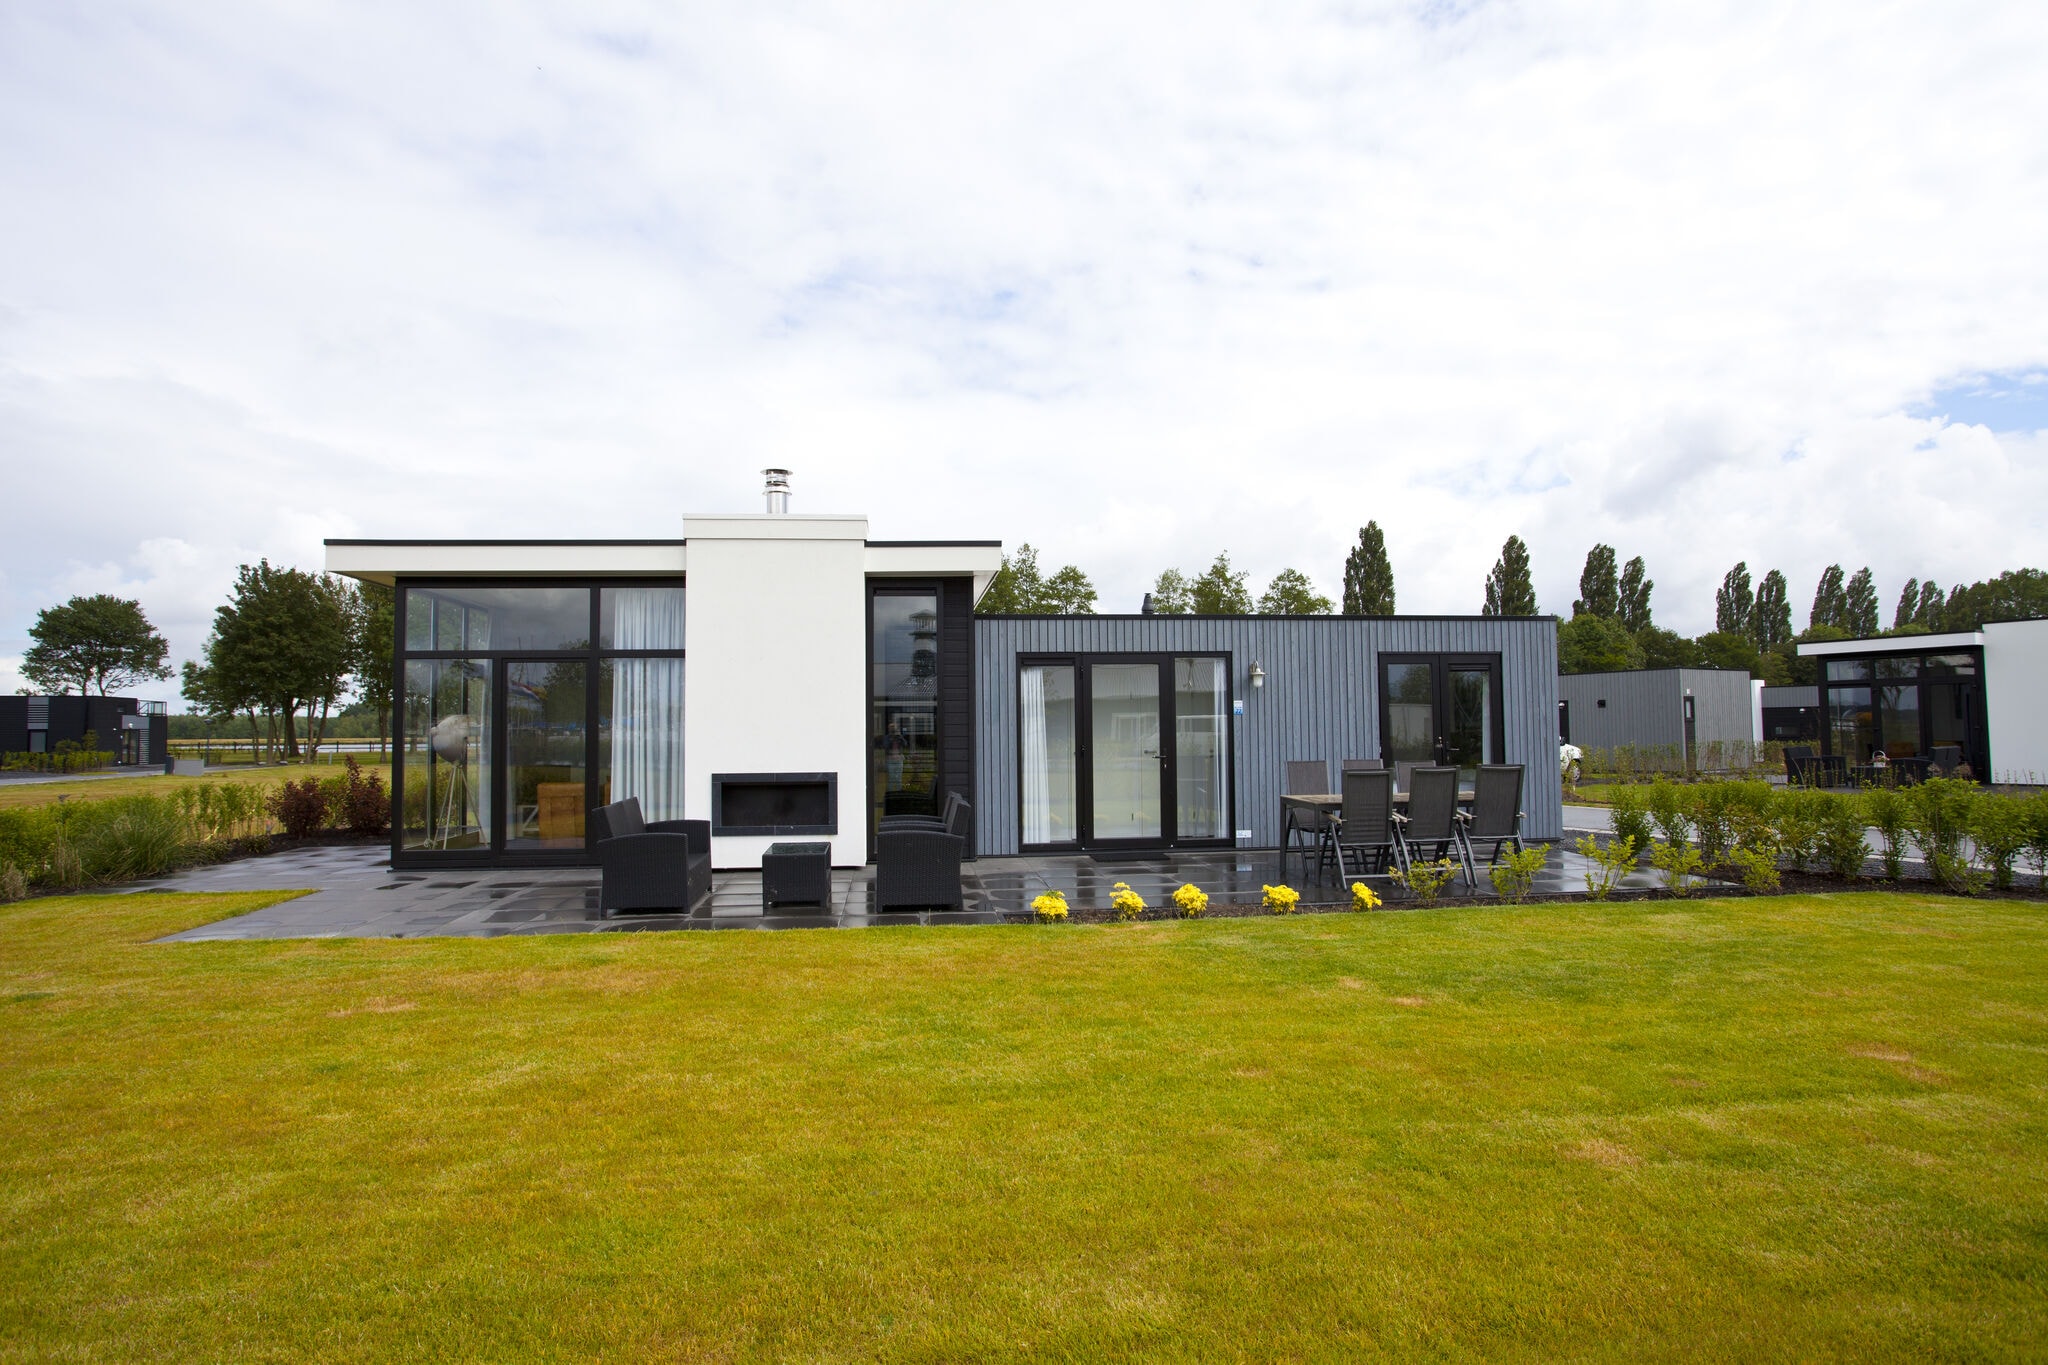 Luxurious holiday home near the Veluwemeer